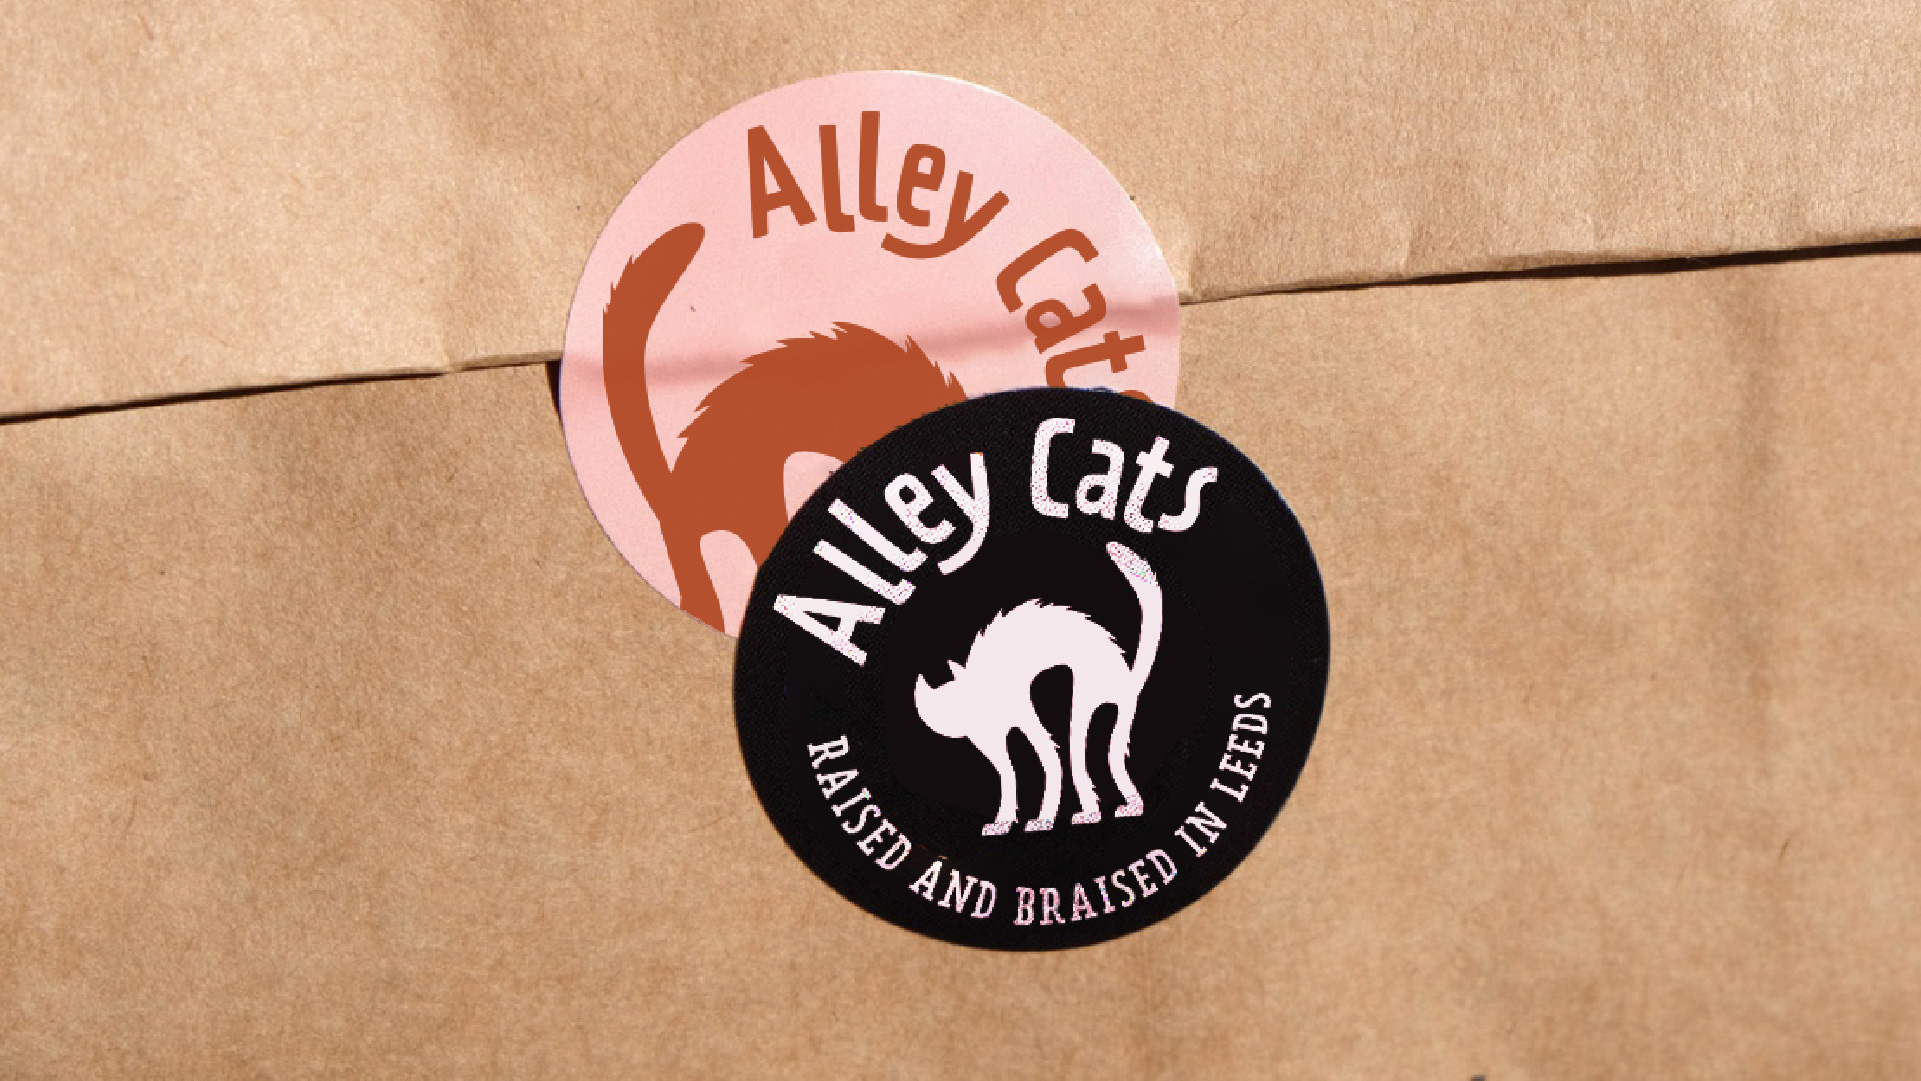 alley cats logo printed on stickers that are stuck on a paper carry-on bag